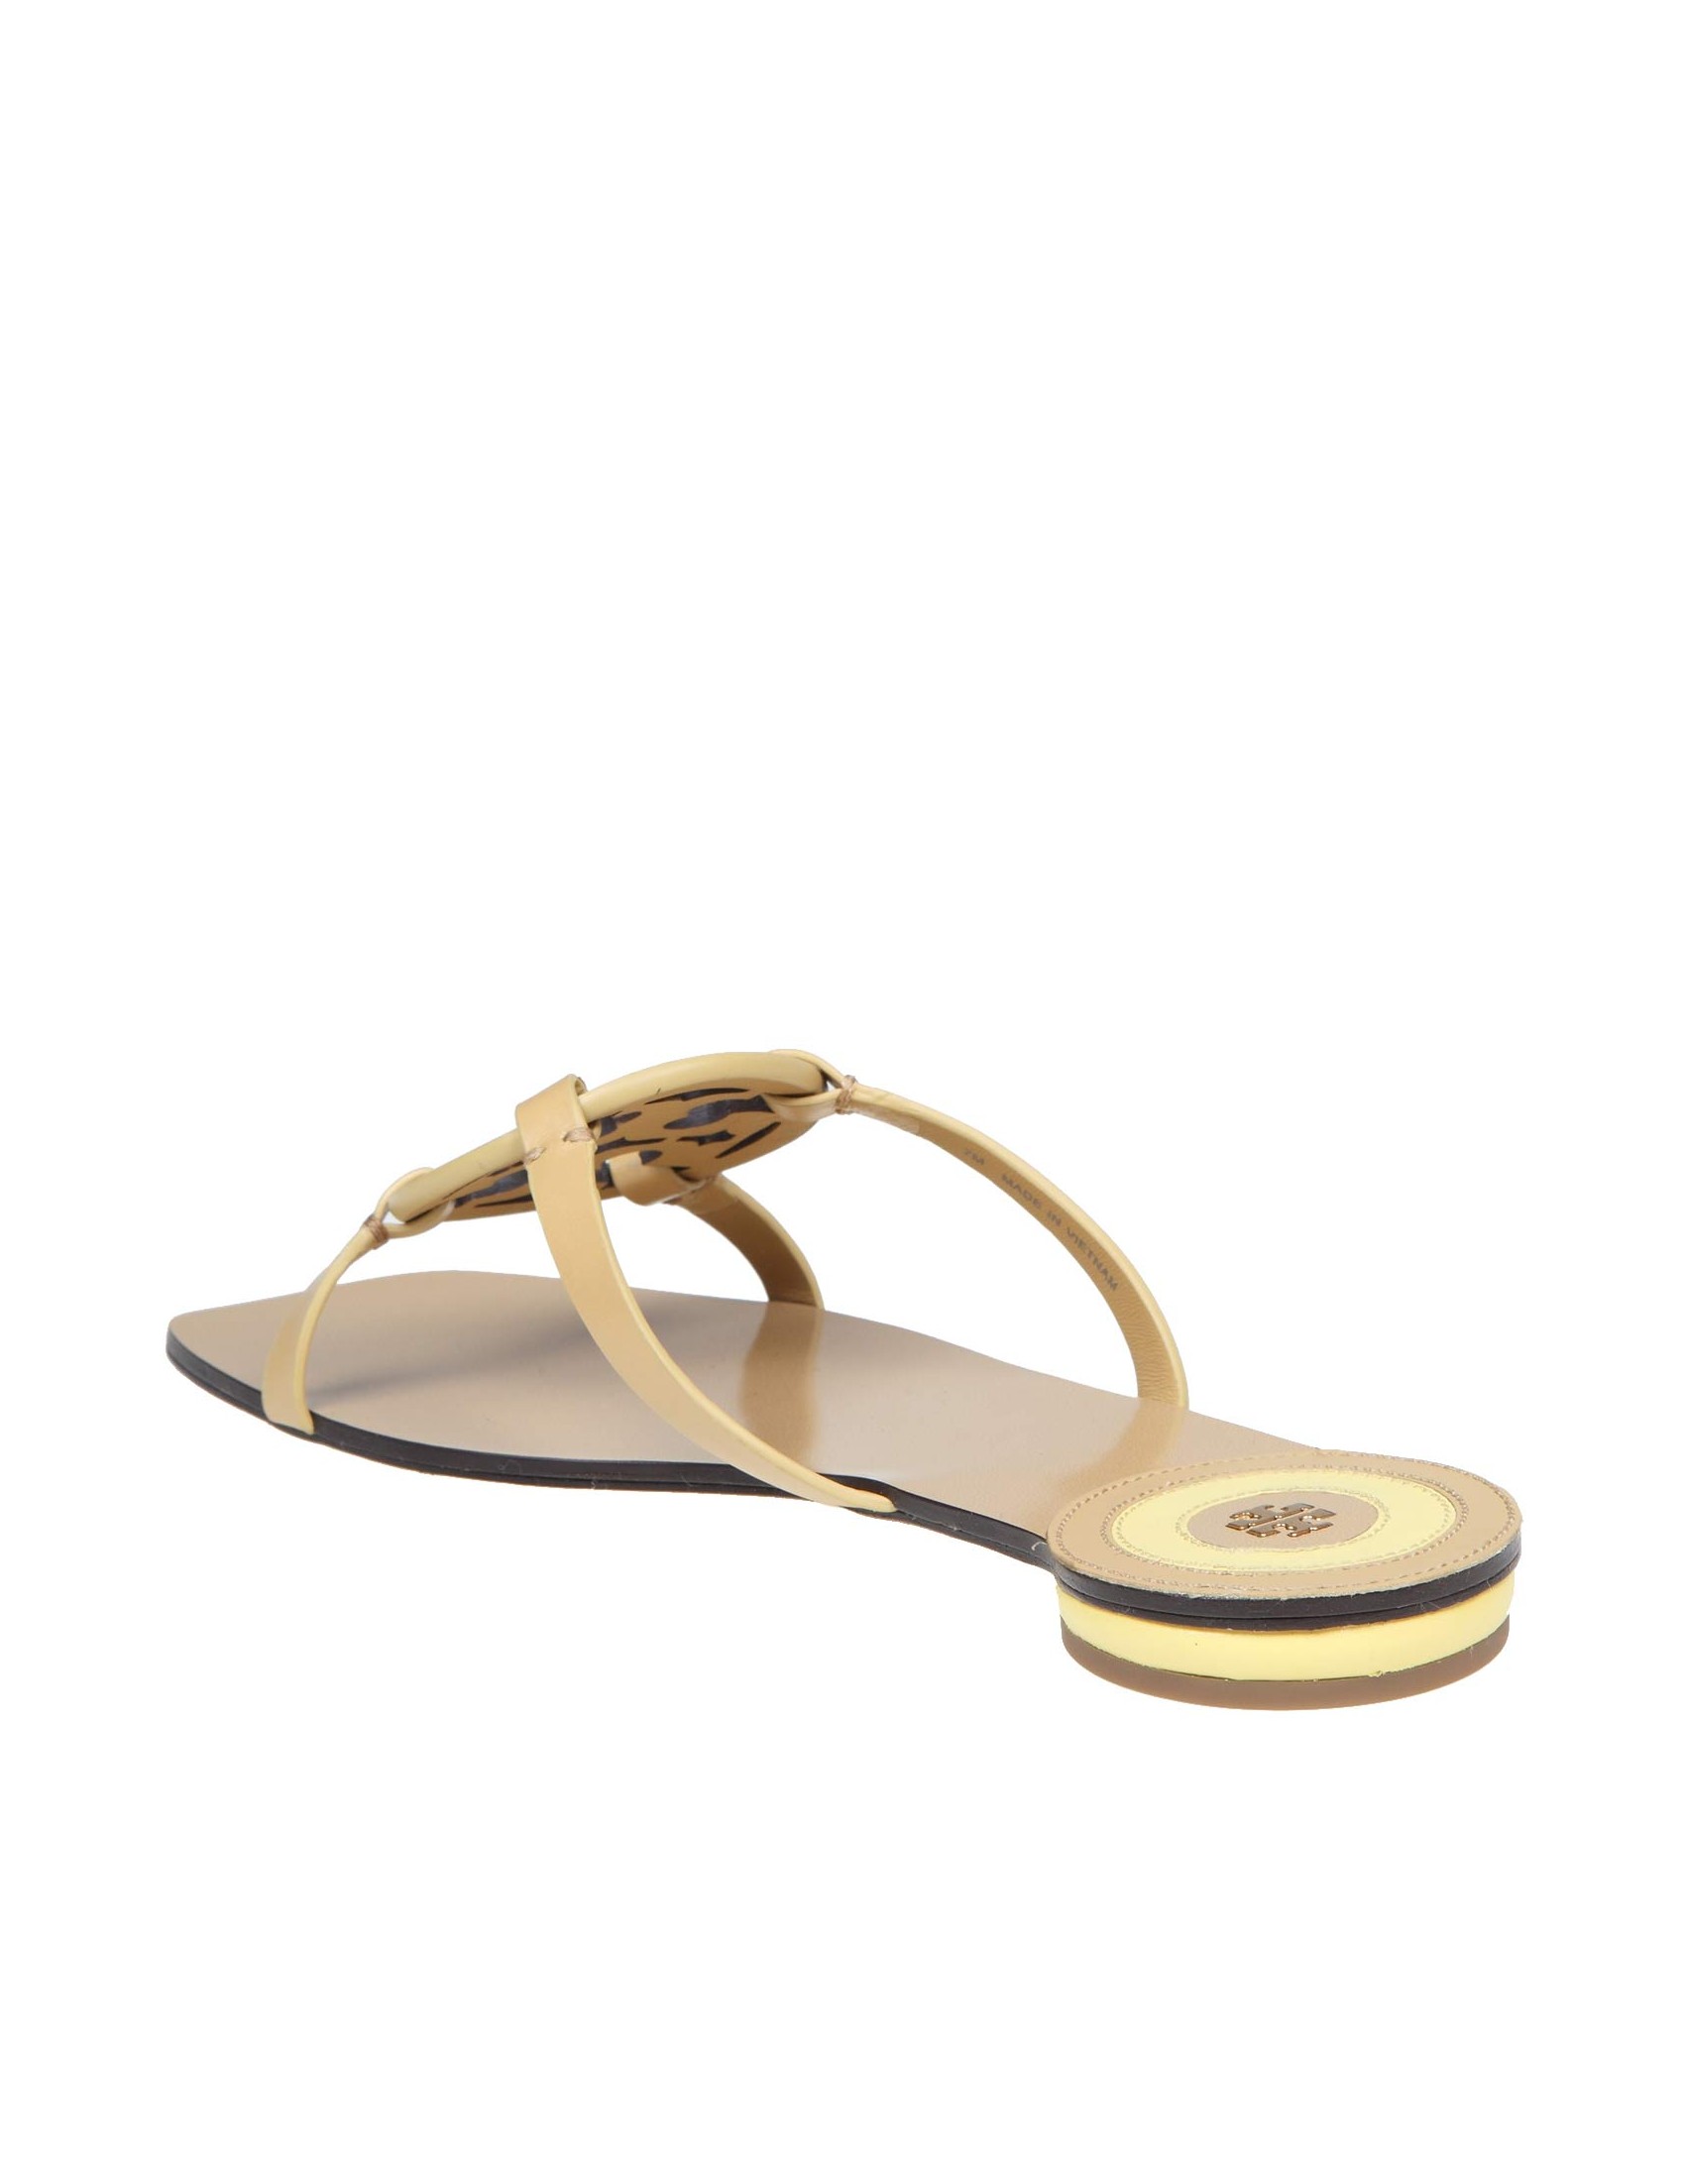 TORY BURCH MILLER SANDAL IN LEATHER WITH LOGO